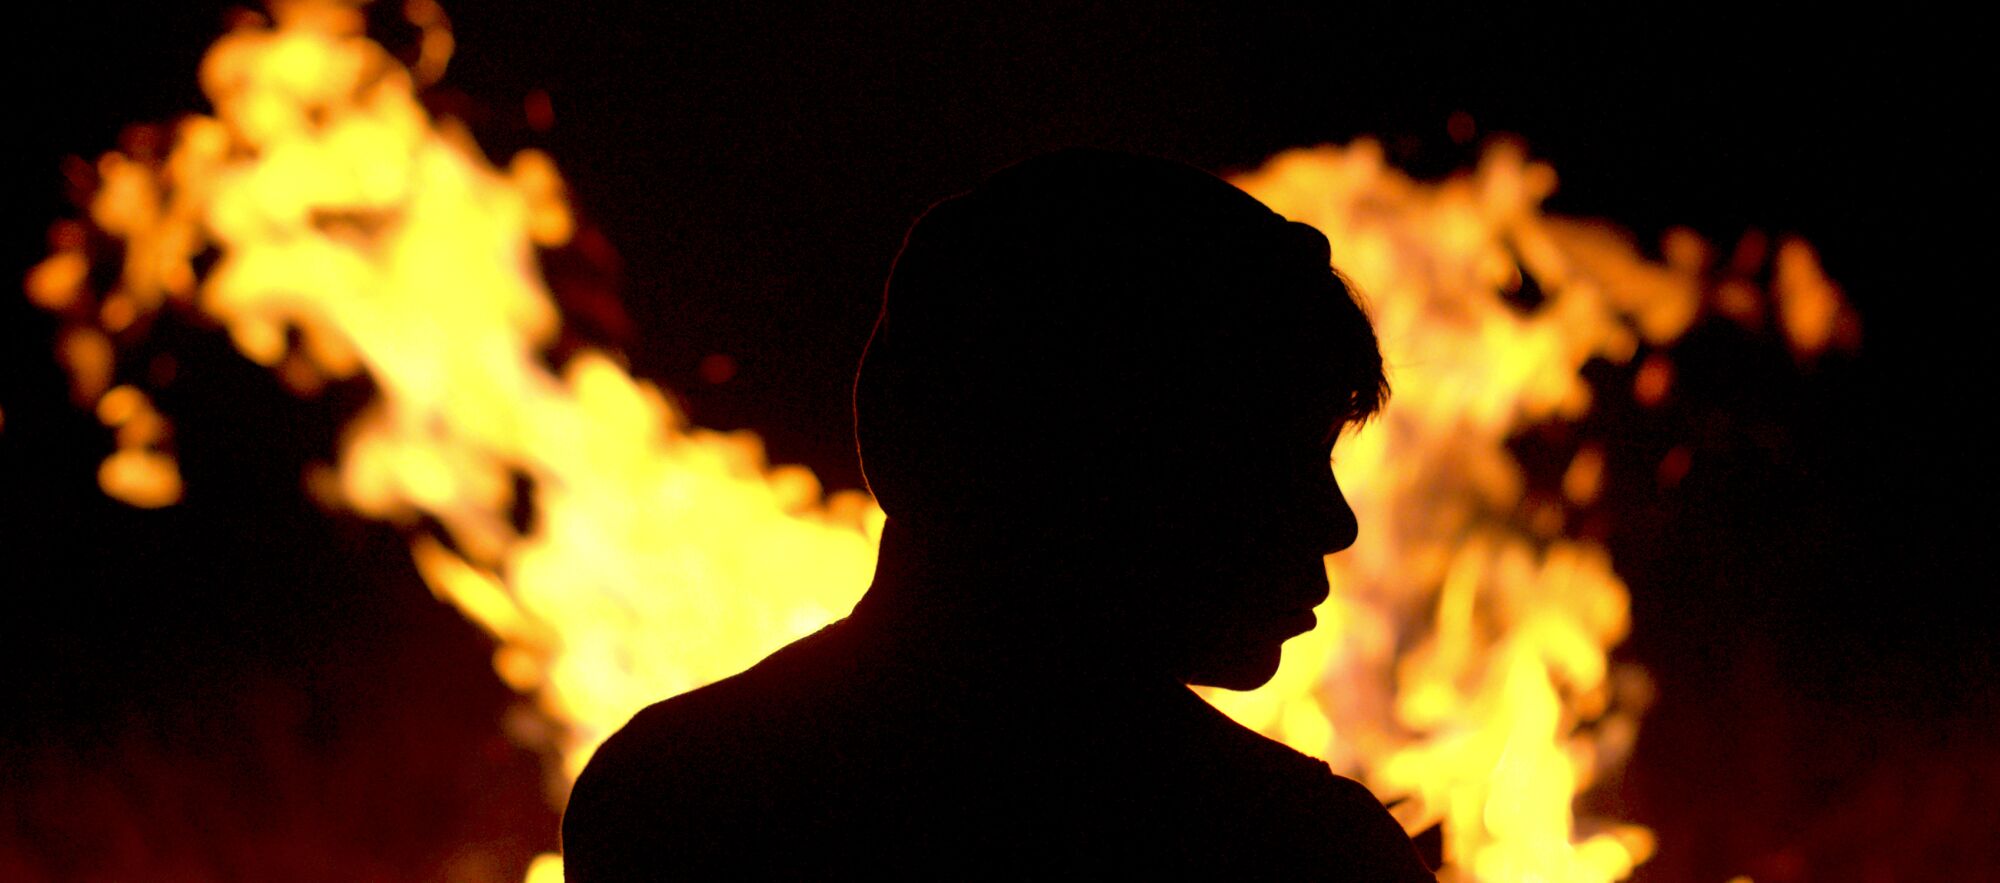 Juan Jesús Varela is silhouetted by flames in a scene from "Identifying Features."